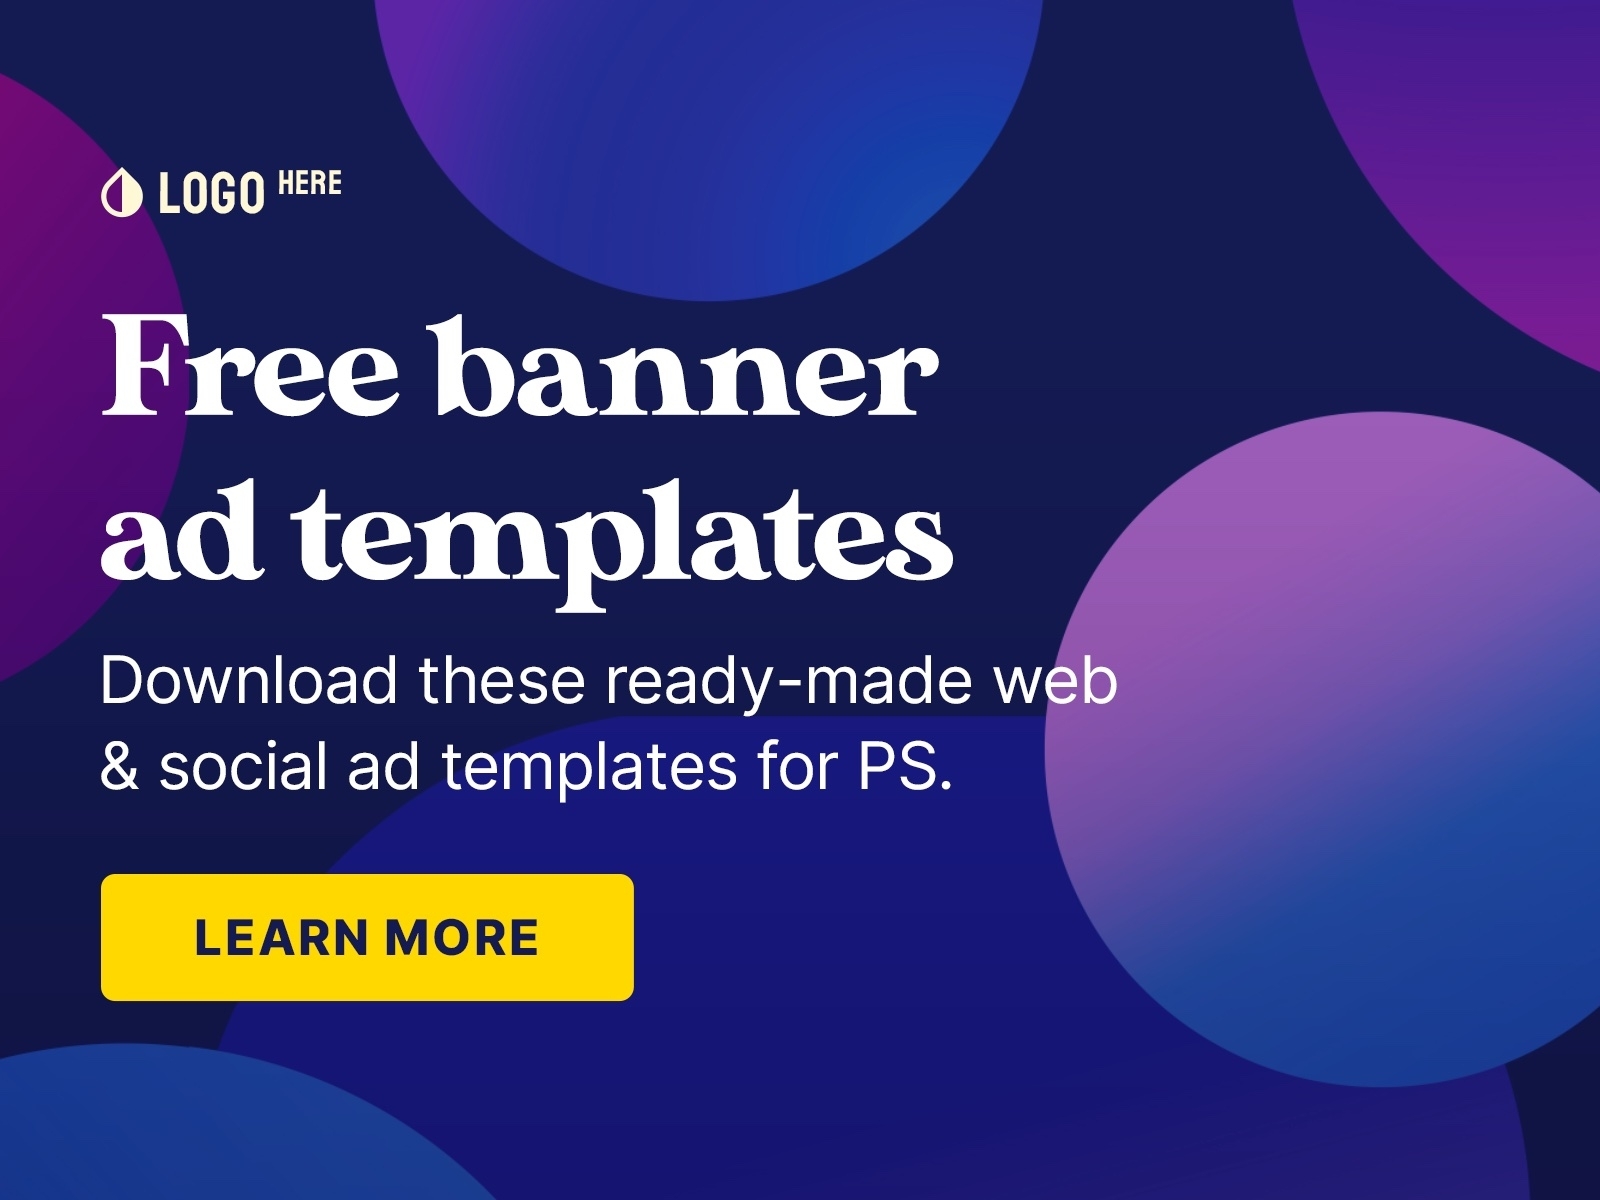 35 Banner Ad Templates by Design.dev on Dribbble